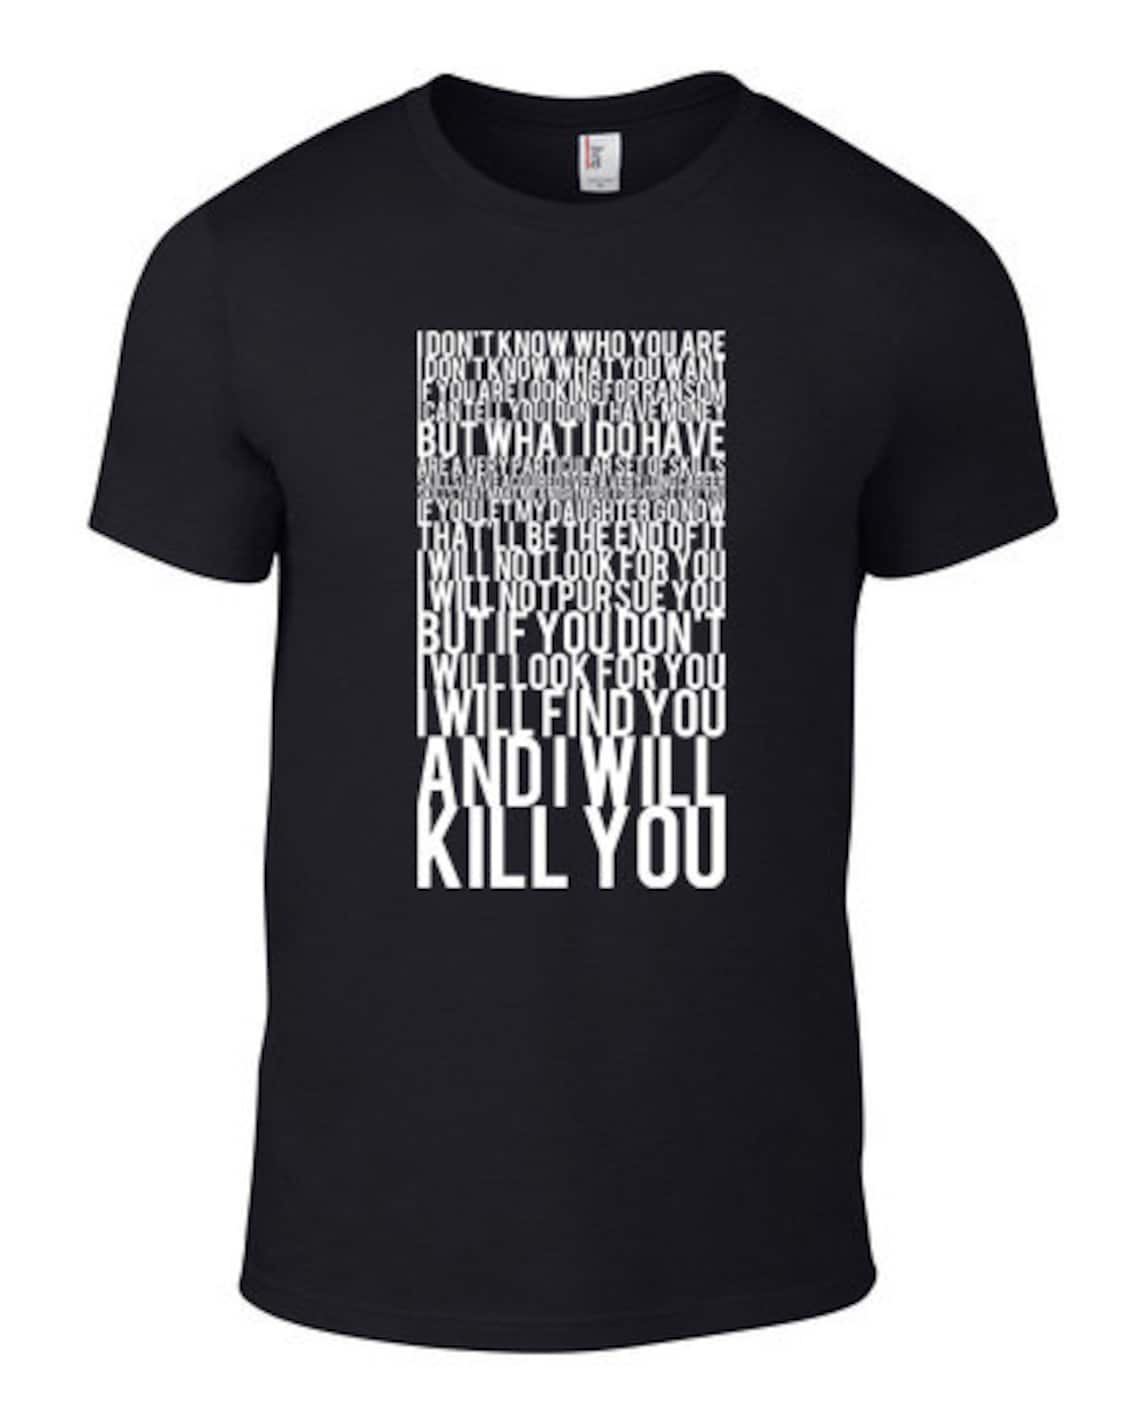 I Will Find You and I Will Kill You Tshirt FREE SHIPPING - Etsy